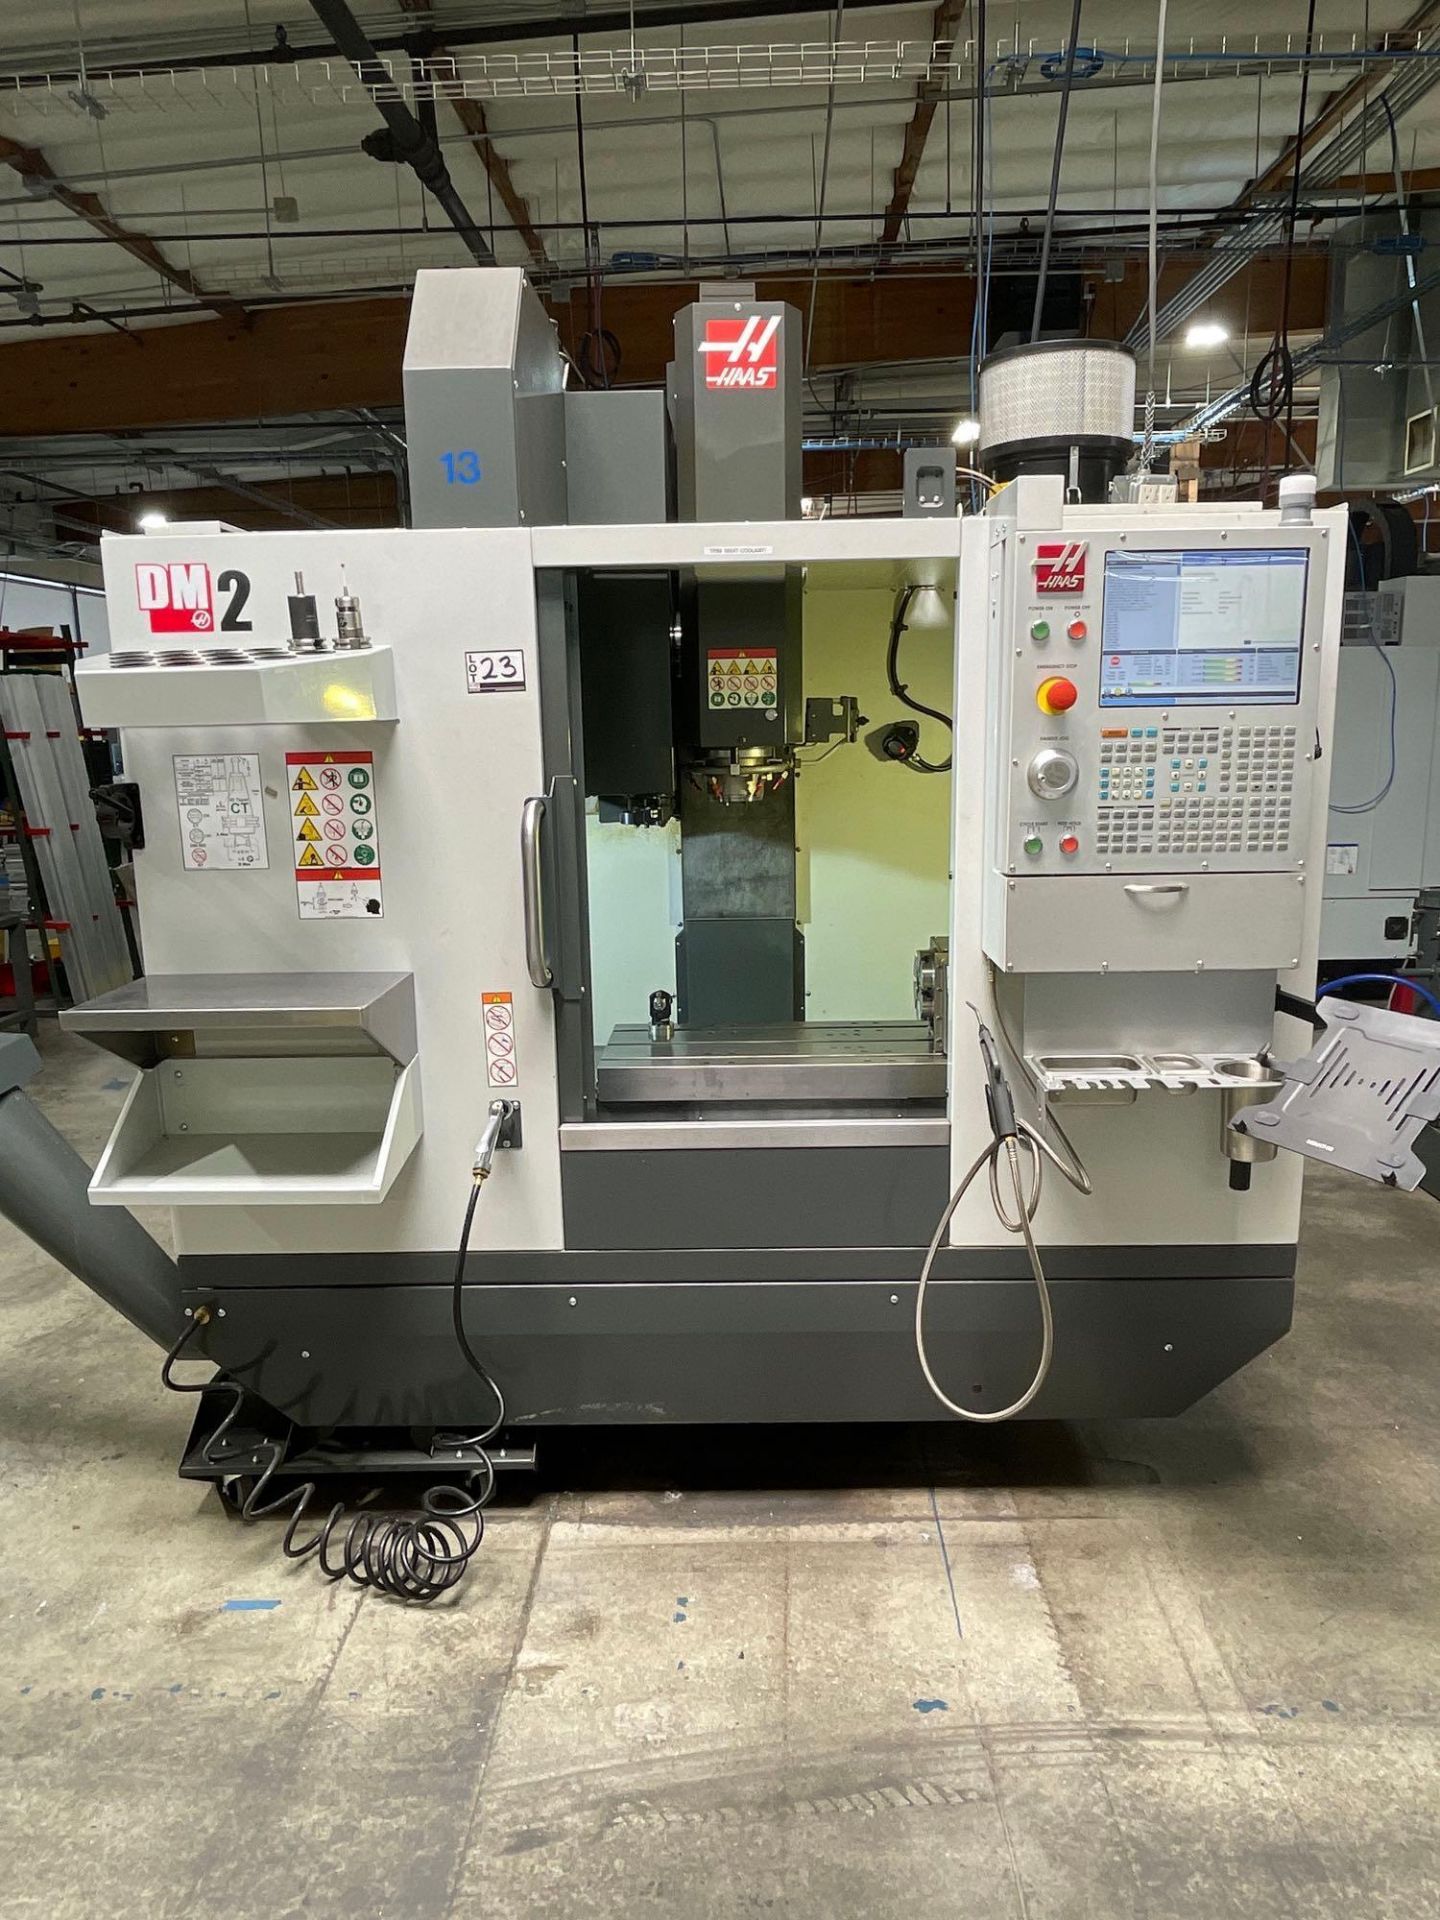 Haas DM-2, 28” x 16” x 15.5” Travels, CT 40, 18+1 SMTC, CTS, WIPS, as New as 2021